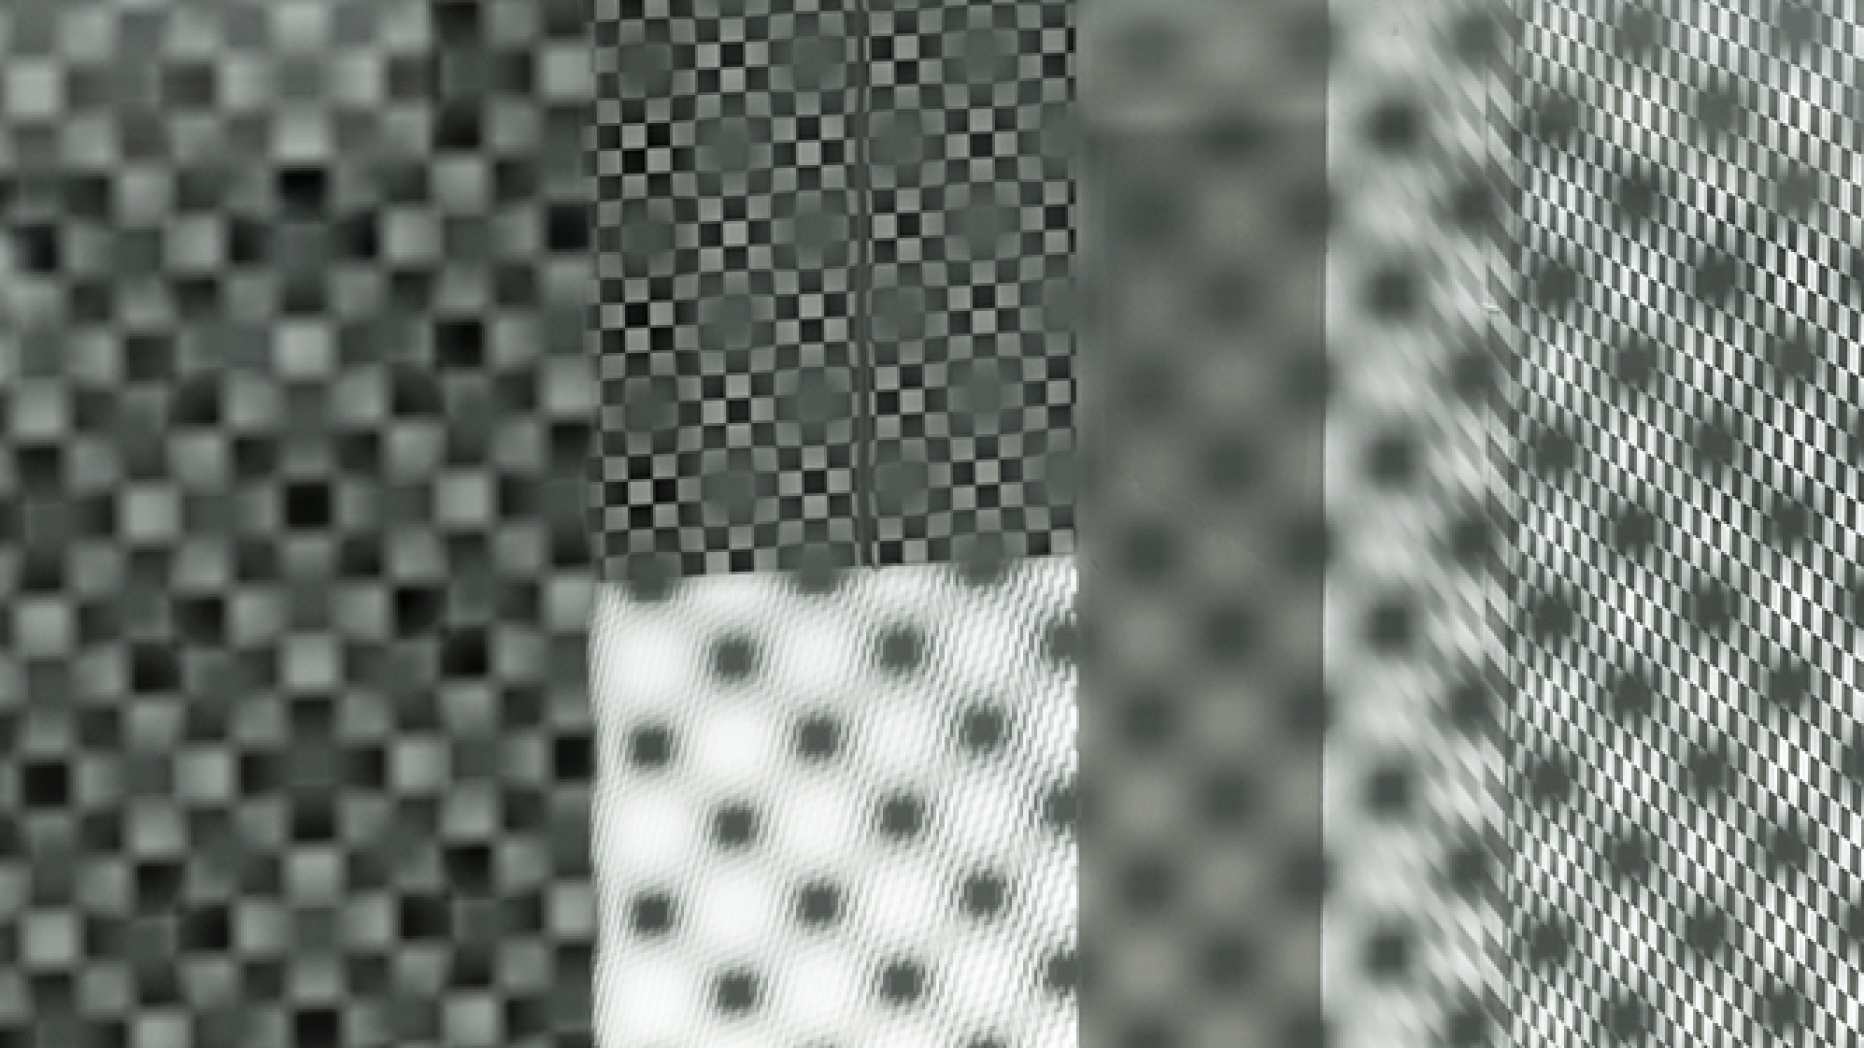 Complex abstract photo showing many layers of surfaces covered in repeating patterns and markings